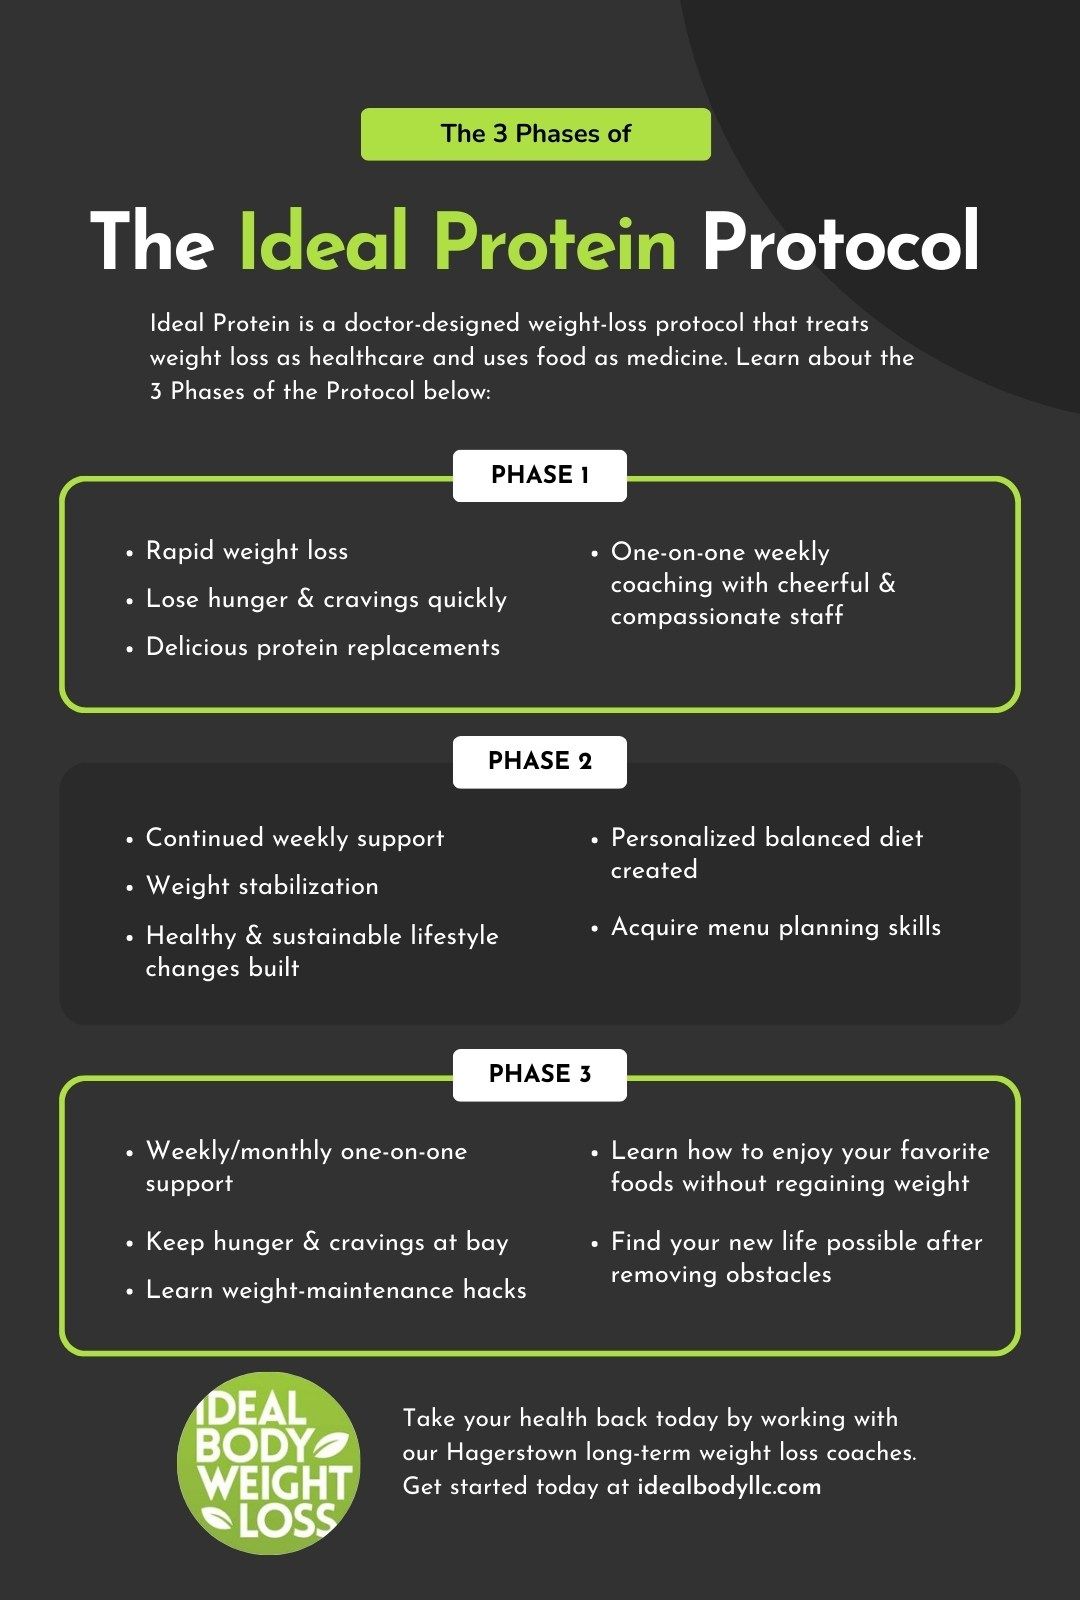 M37887 - Ideal Body Weight Loss_The 3 Phases of The Protocol Infographic.jpg